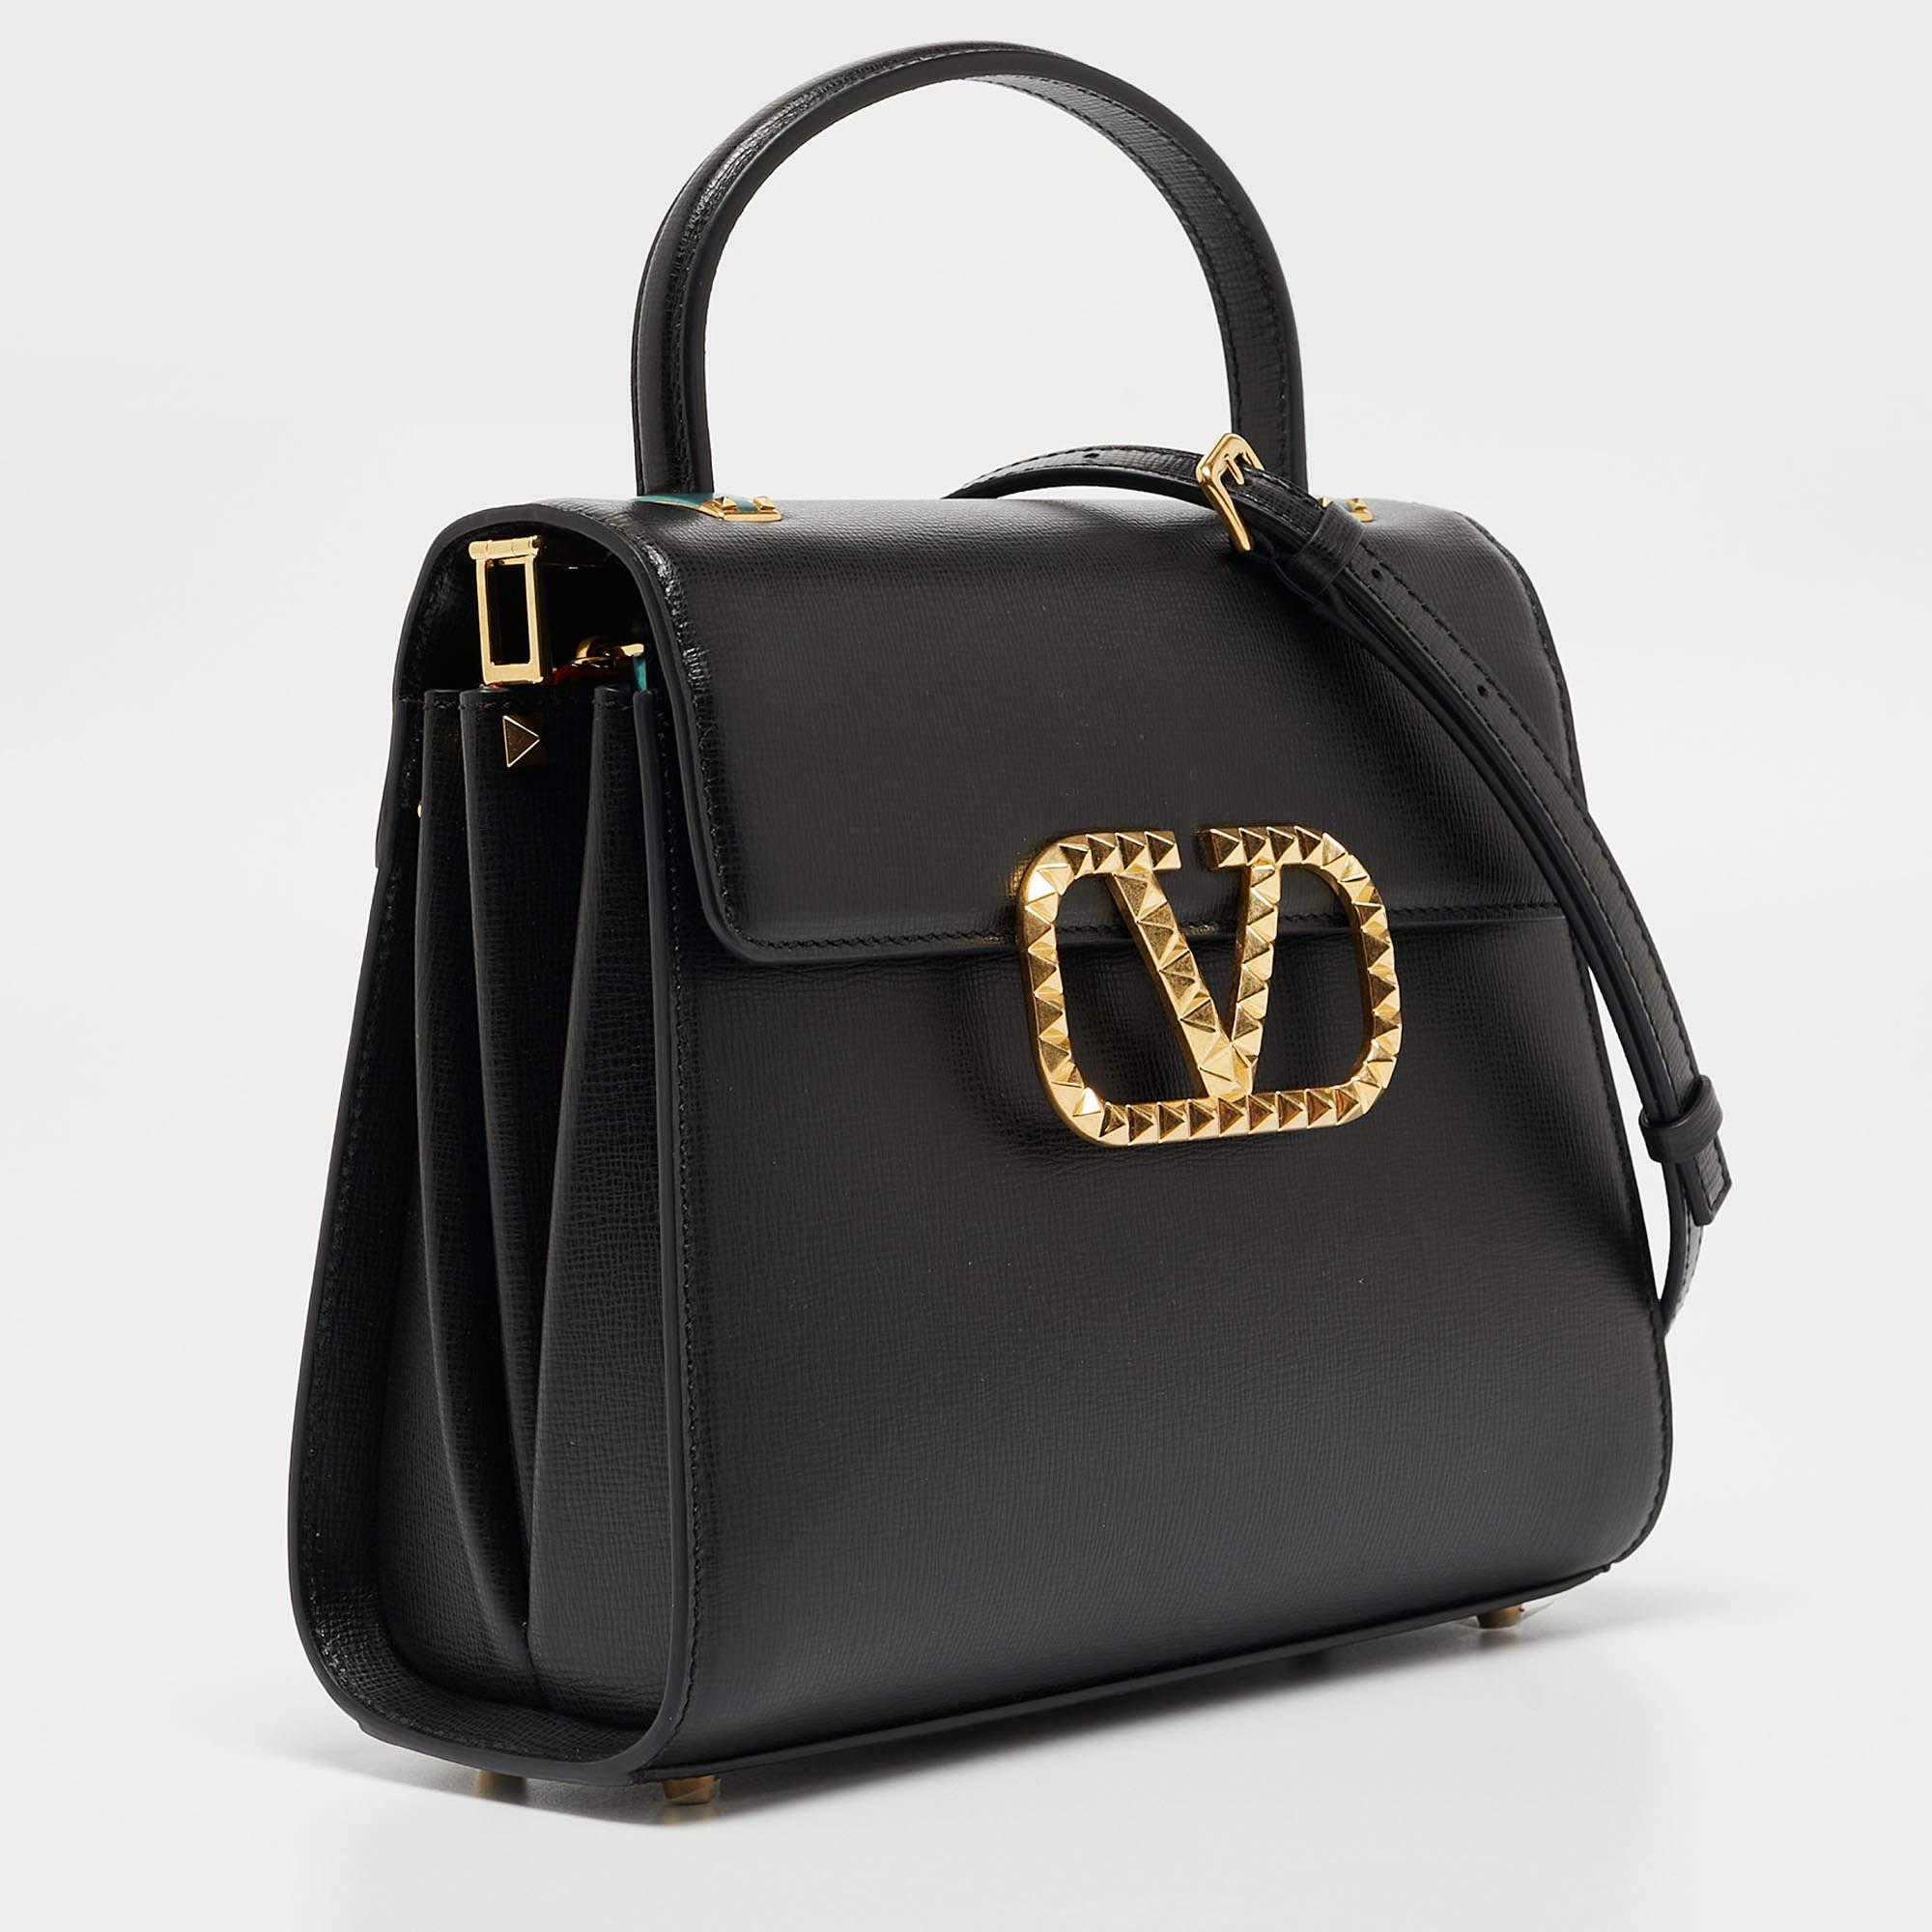 Ensure your day's essentials are in order and your outfit is complete with this Valentino Alcove bag. Crafted using the best materials, the bag carries the maison's signature of artful craftsmanship and enduring appeal.

